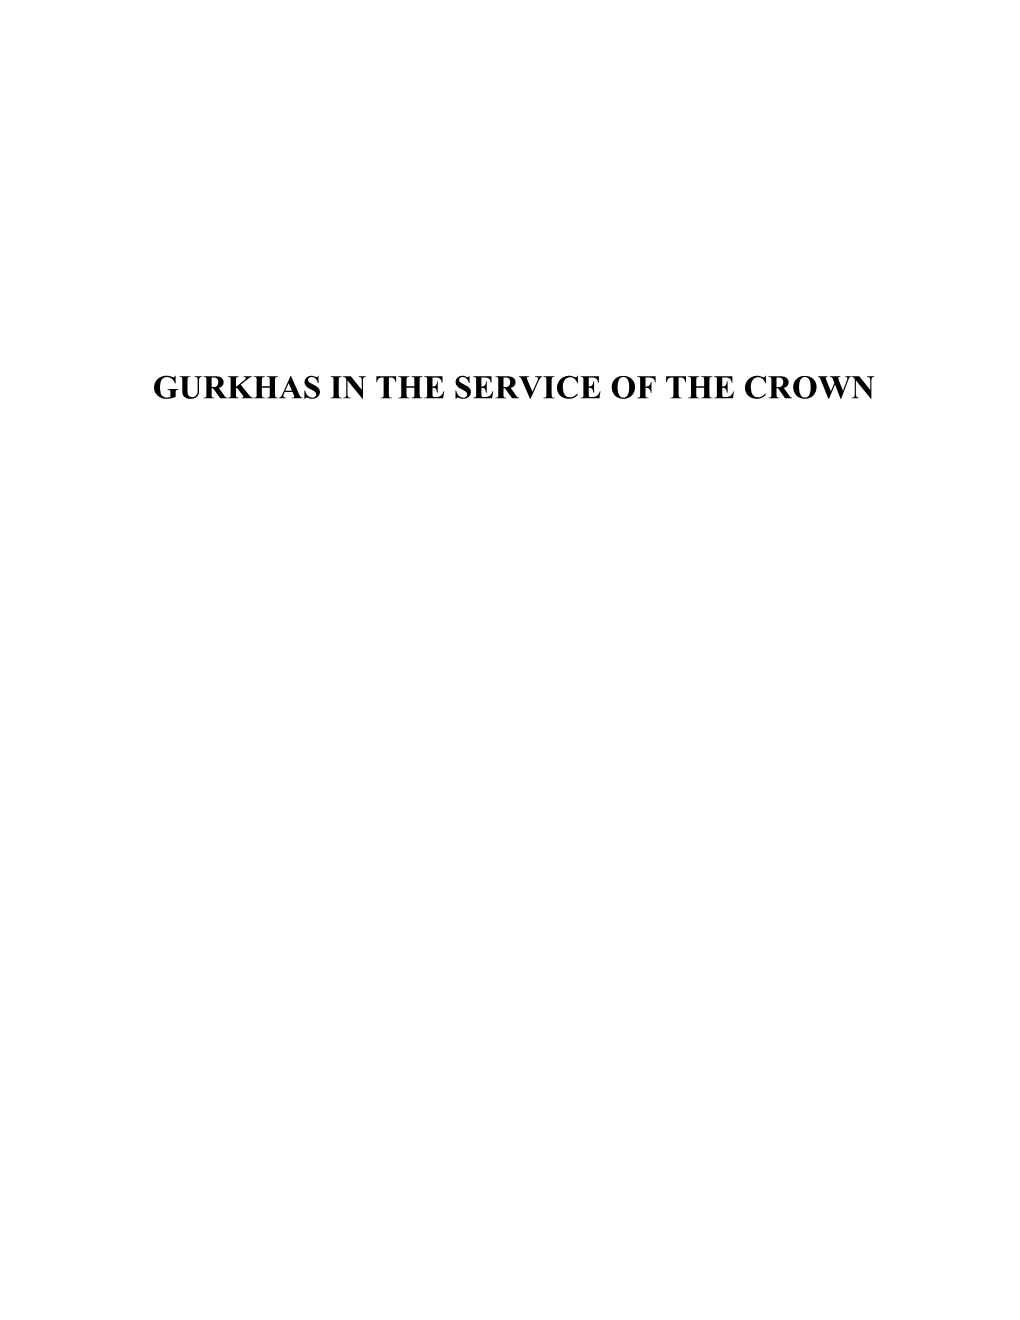 (Gurkhas in the Service of the Crown).Pdf Satyagrah